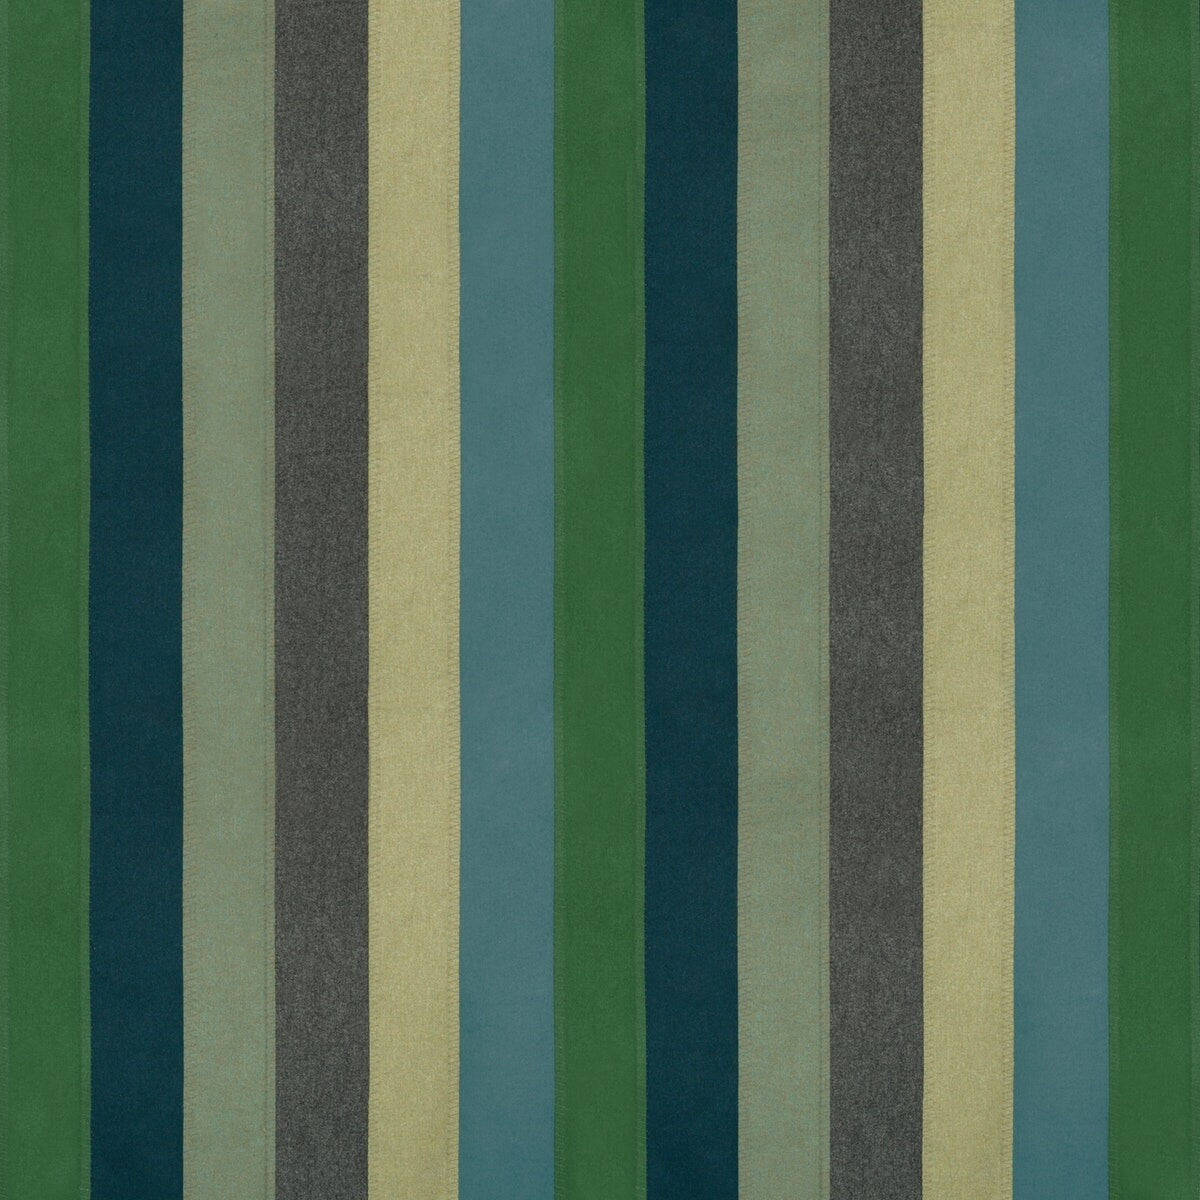 New Suit fabric in peacock color - pattern 34913.35.0 - by Kravet Couture in the Modern Tailor collection